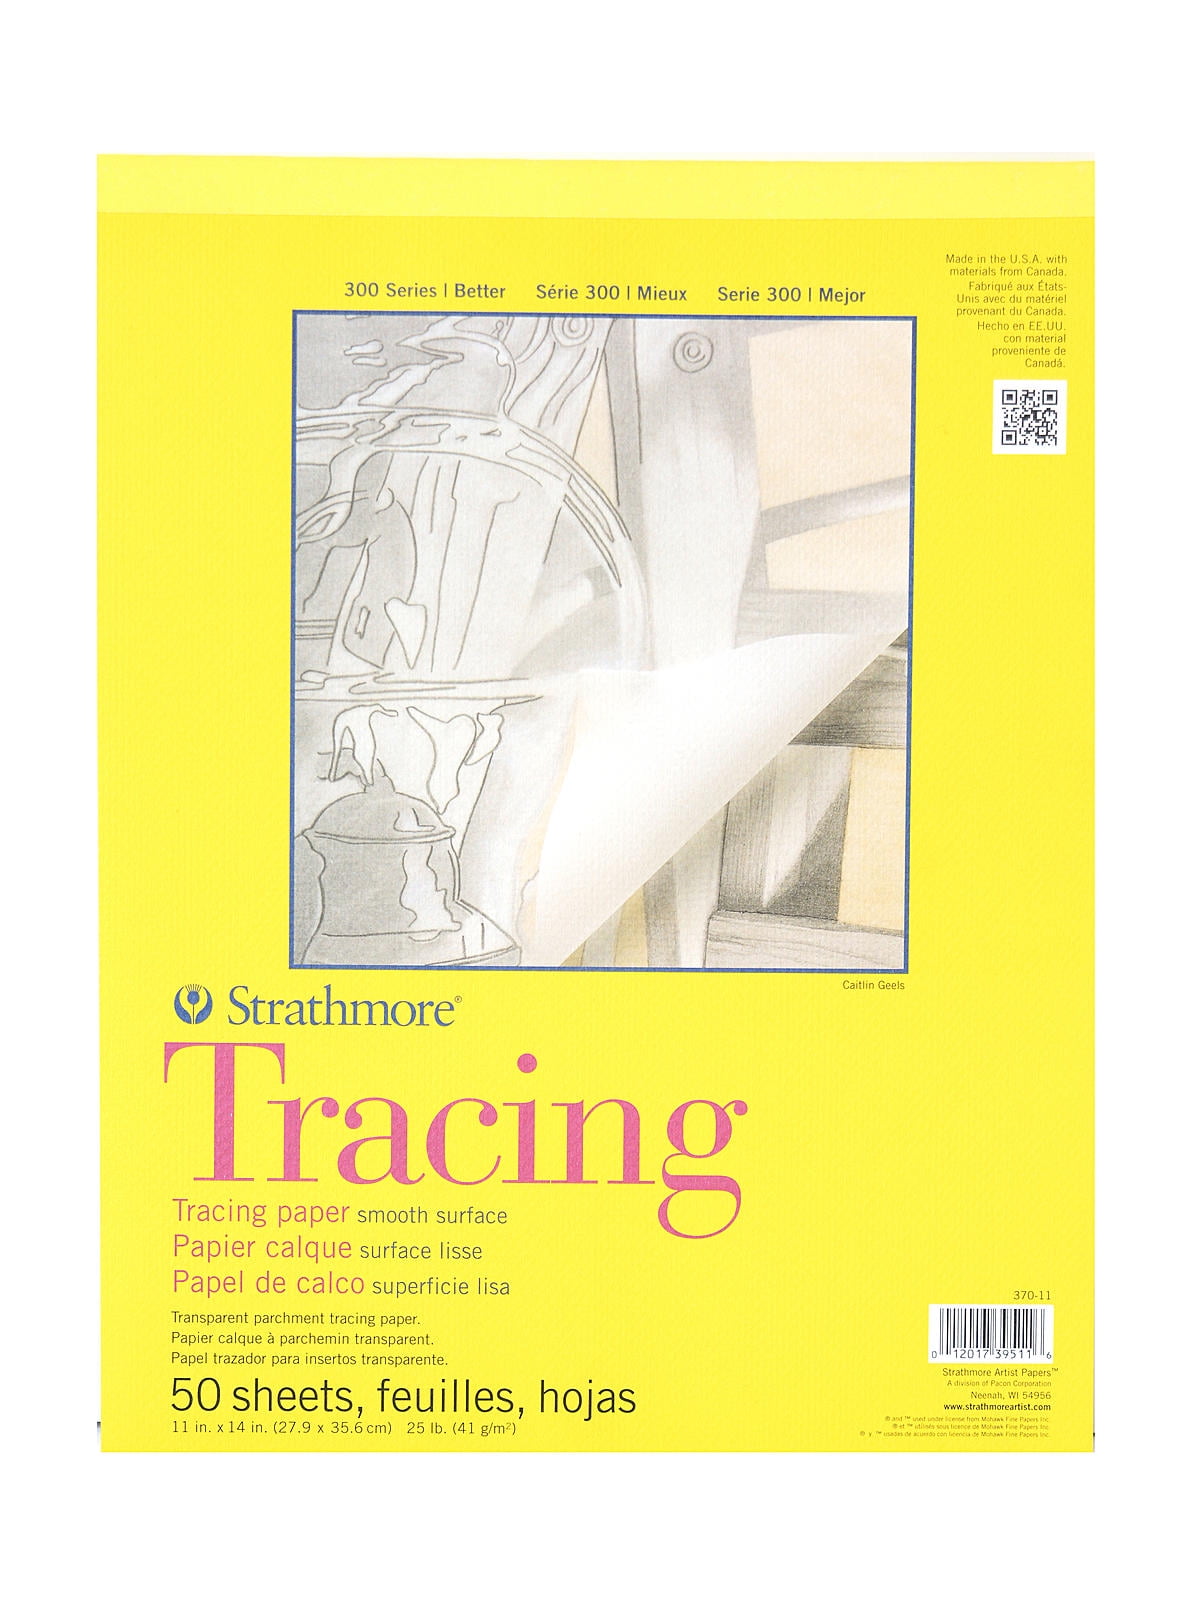 300 Sheets Loose Tracing Paper Sketch Art Transfer Overlay Drawing 8.5”X 11”